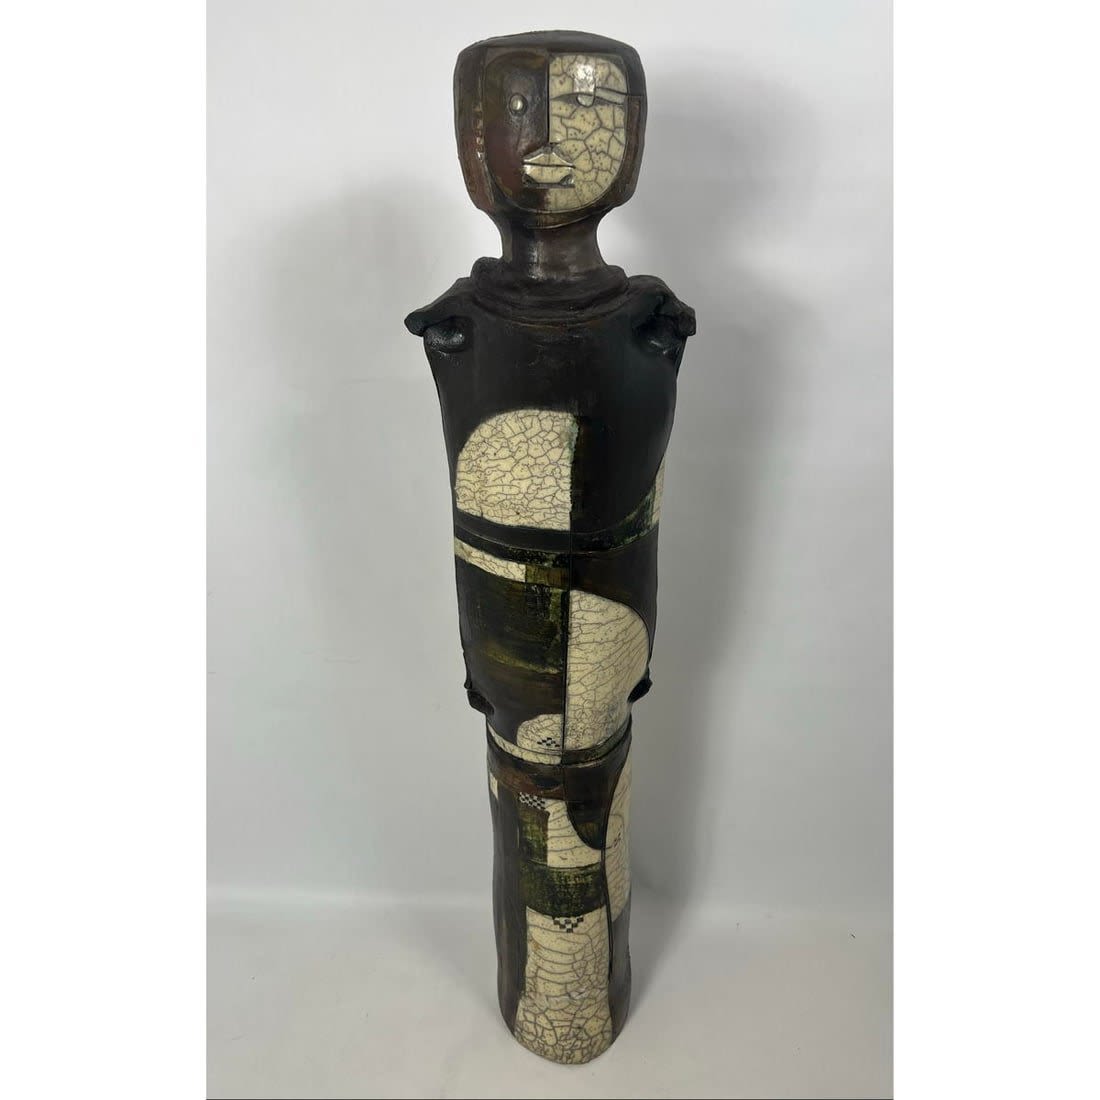 Tall abstract pottery sculpture.